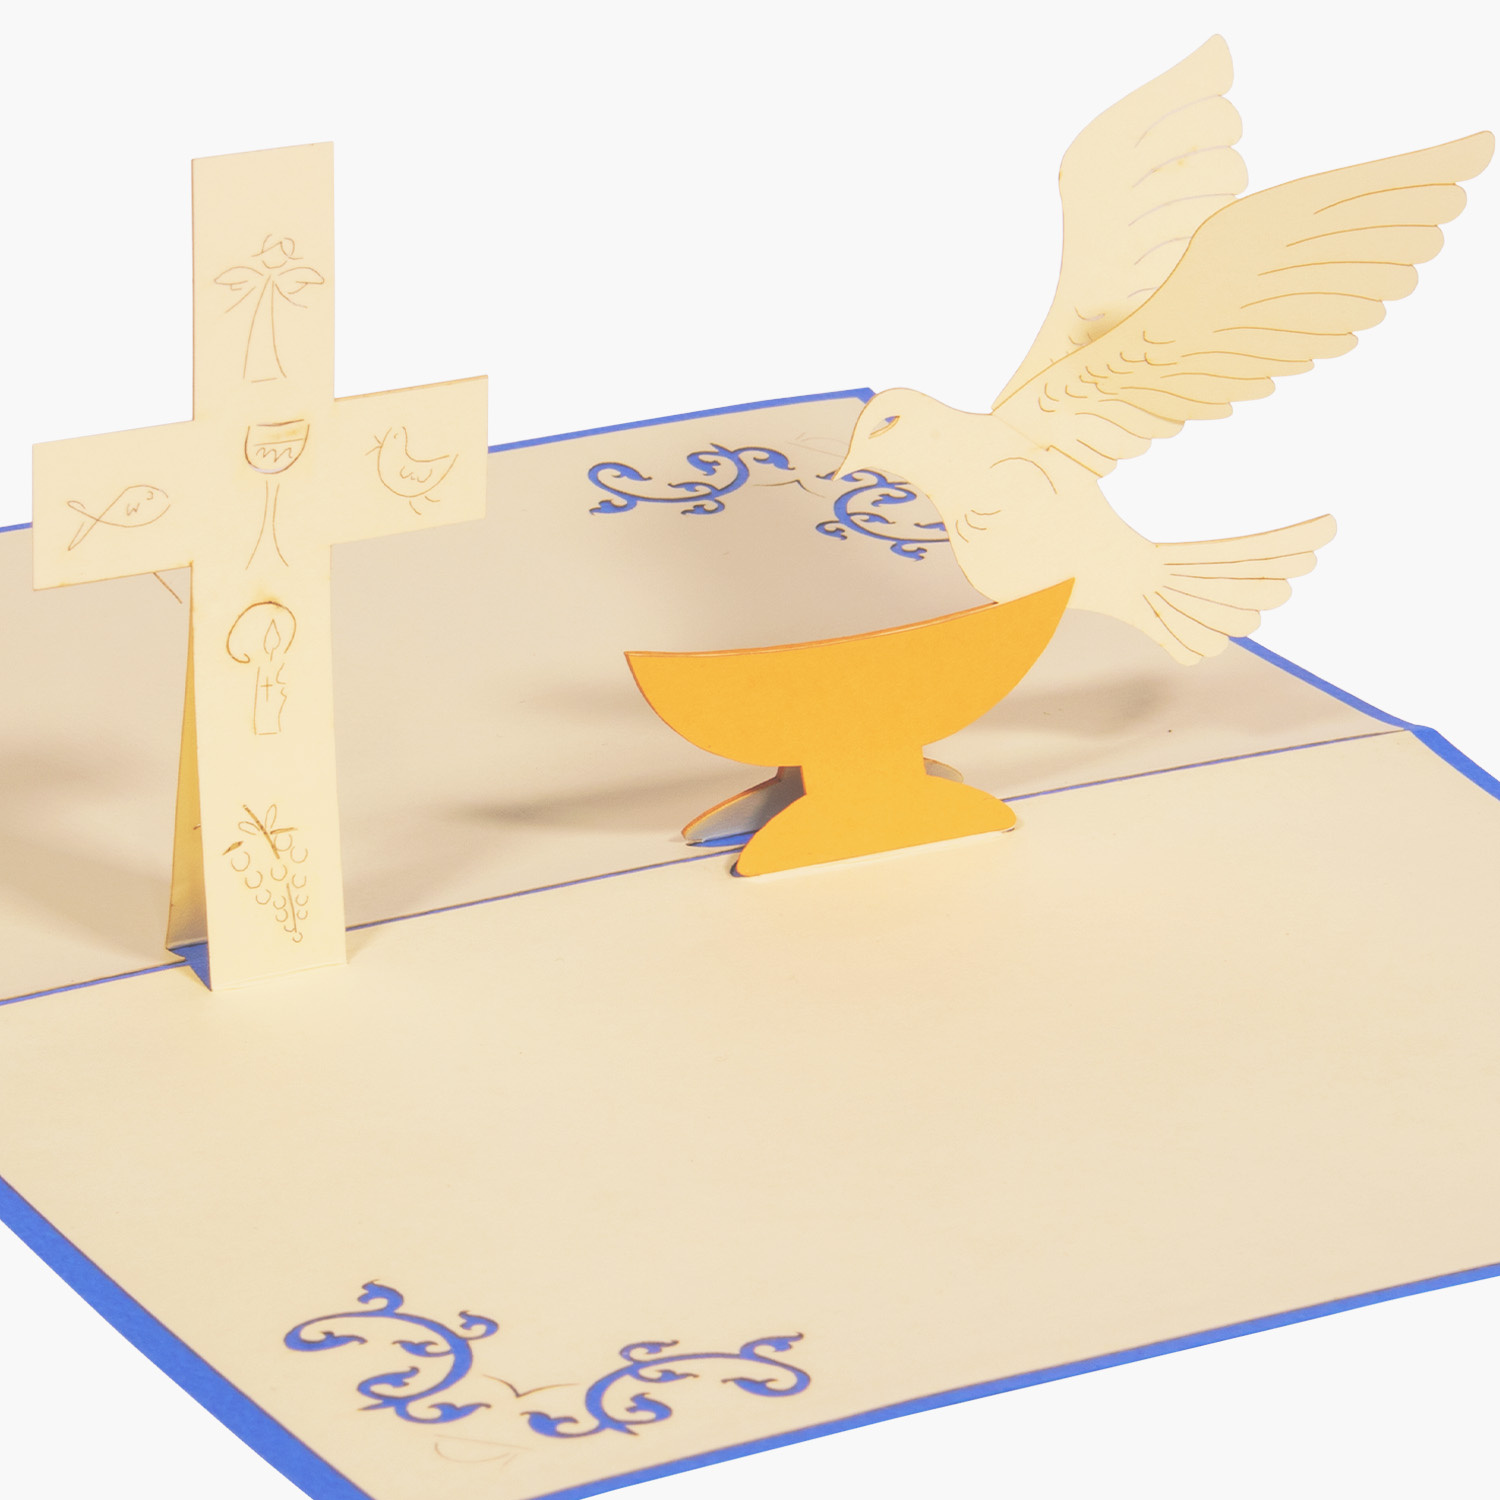 LINPOPUP Pop Up 3D Card, Birth Card, Voucher, Greeting Card for Communion, confirmation, Christening, LINPopUp®, N102